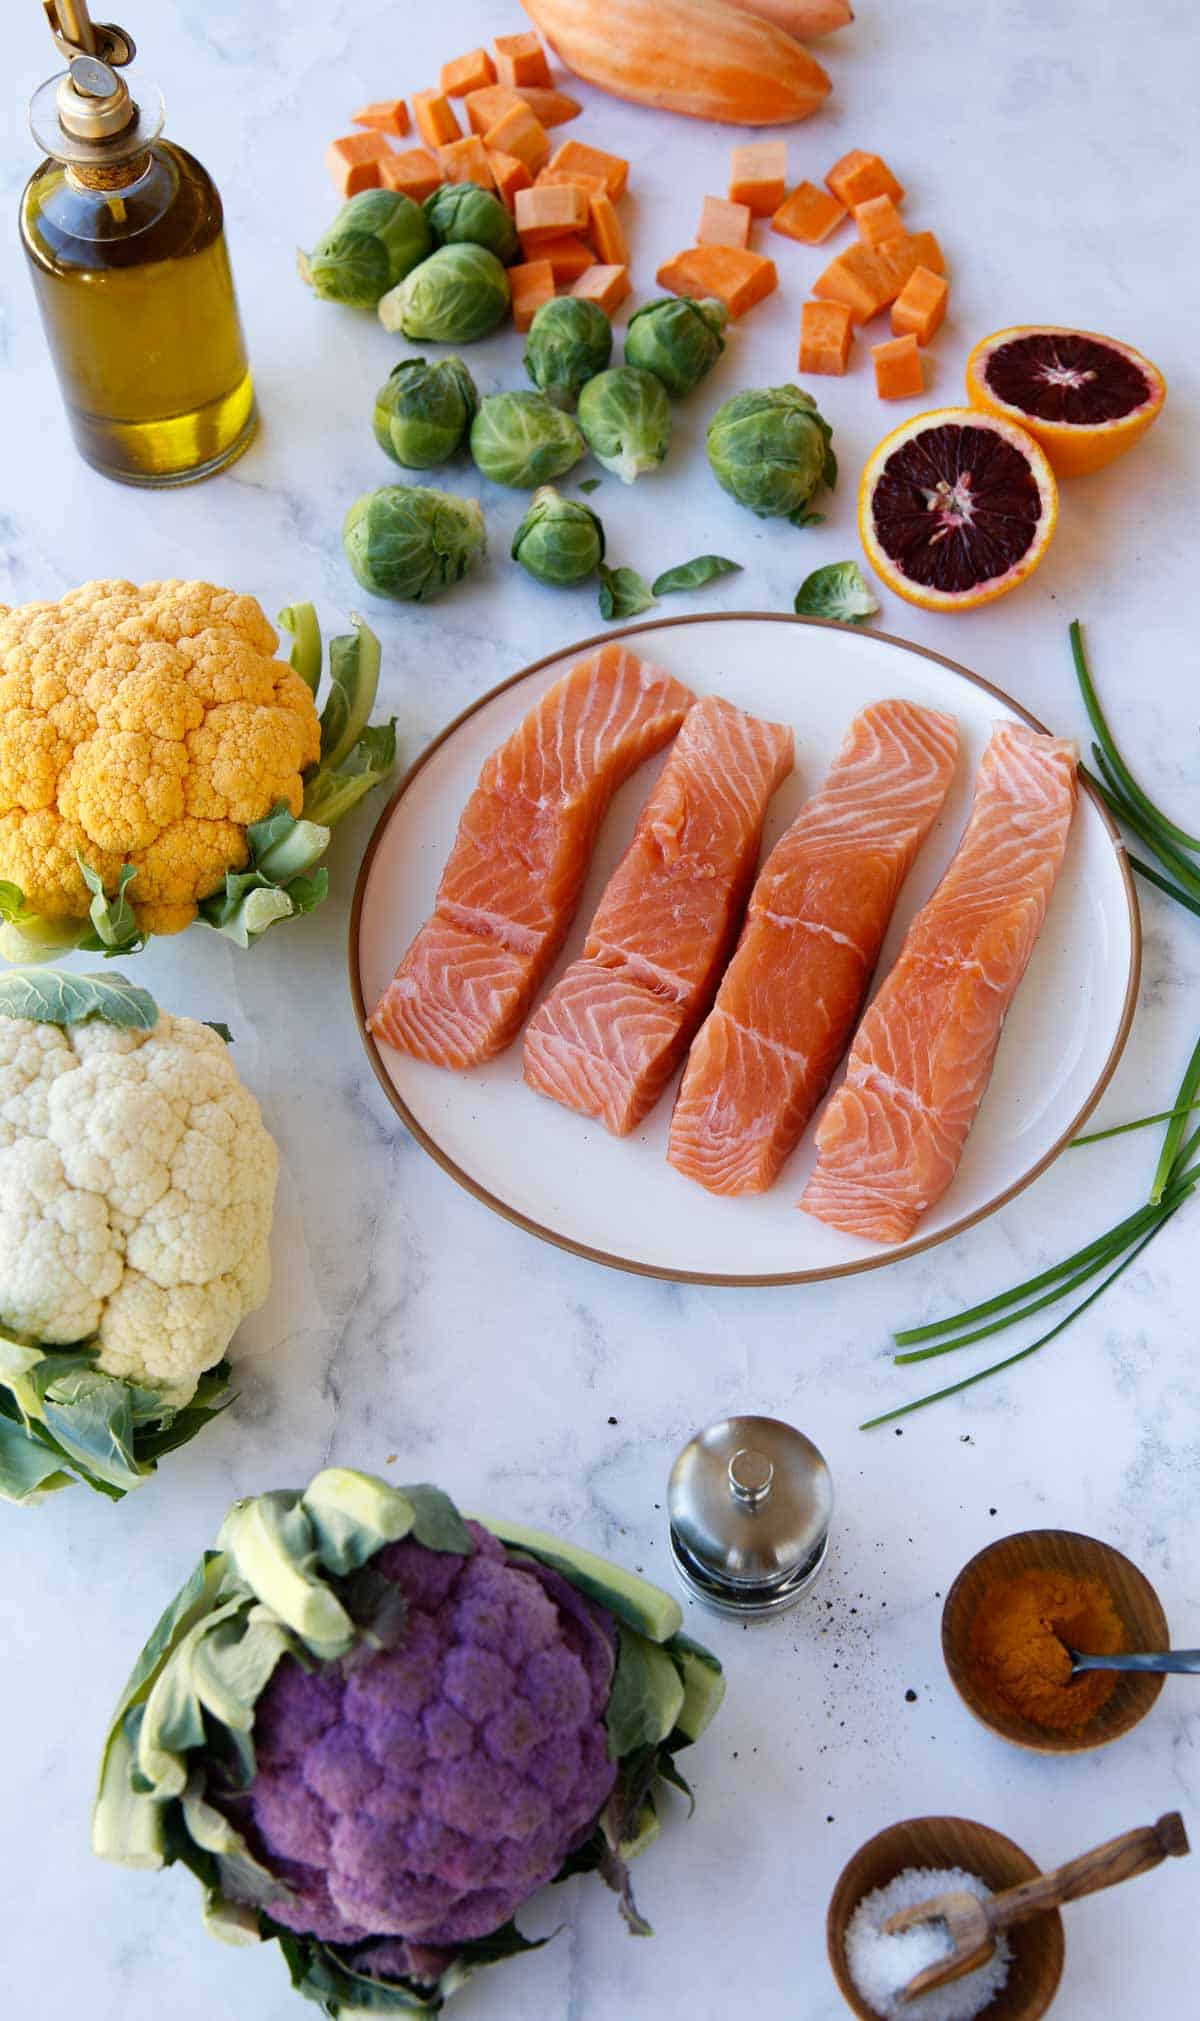 Ingredients for Pan Seared Salmon and Vegetables on a plate